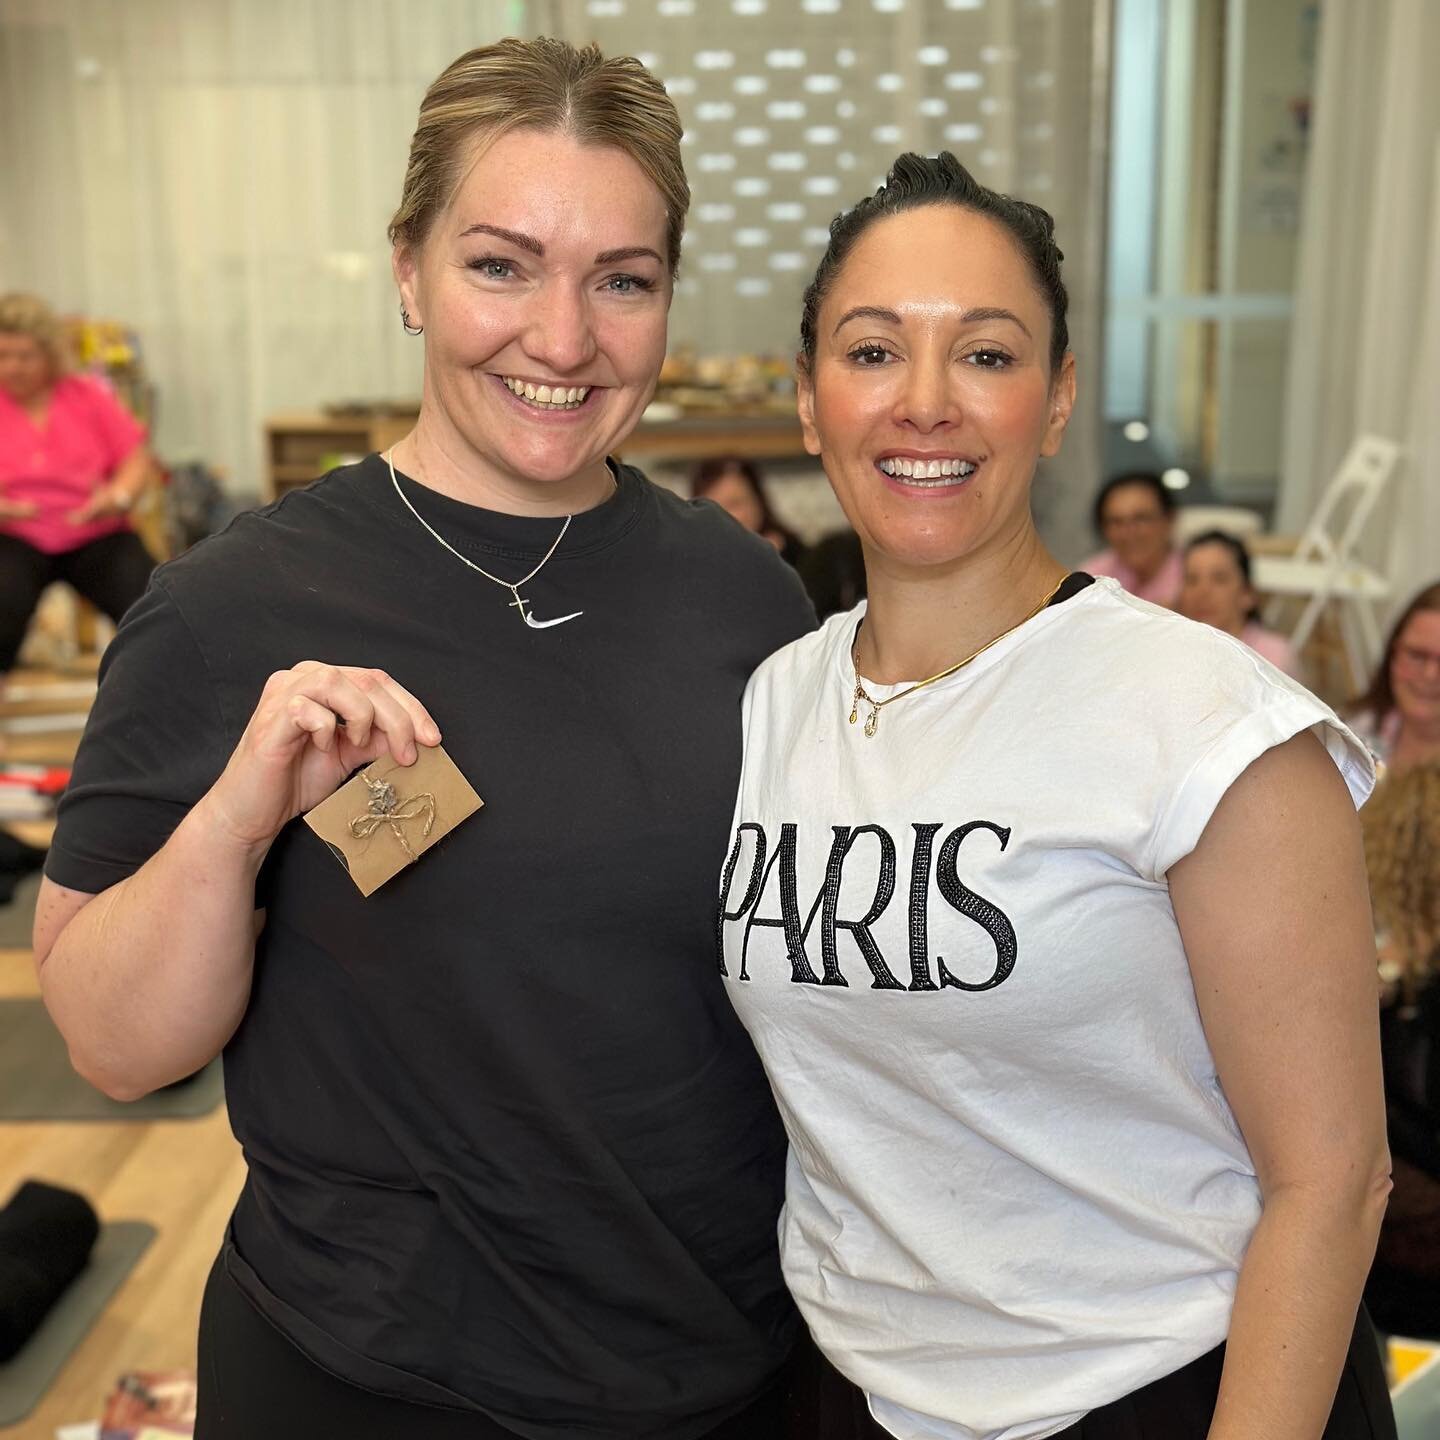 Congratulations to our lucky ladies who took away some amazing prizes &amp; goodies yesterday at our Women&rsquo;s Health &amp; Wellness event in Camden. Don&rsquo;t forget to show some love to @liptember and our wonderful sponsors who helped make th